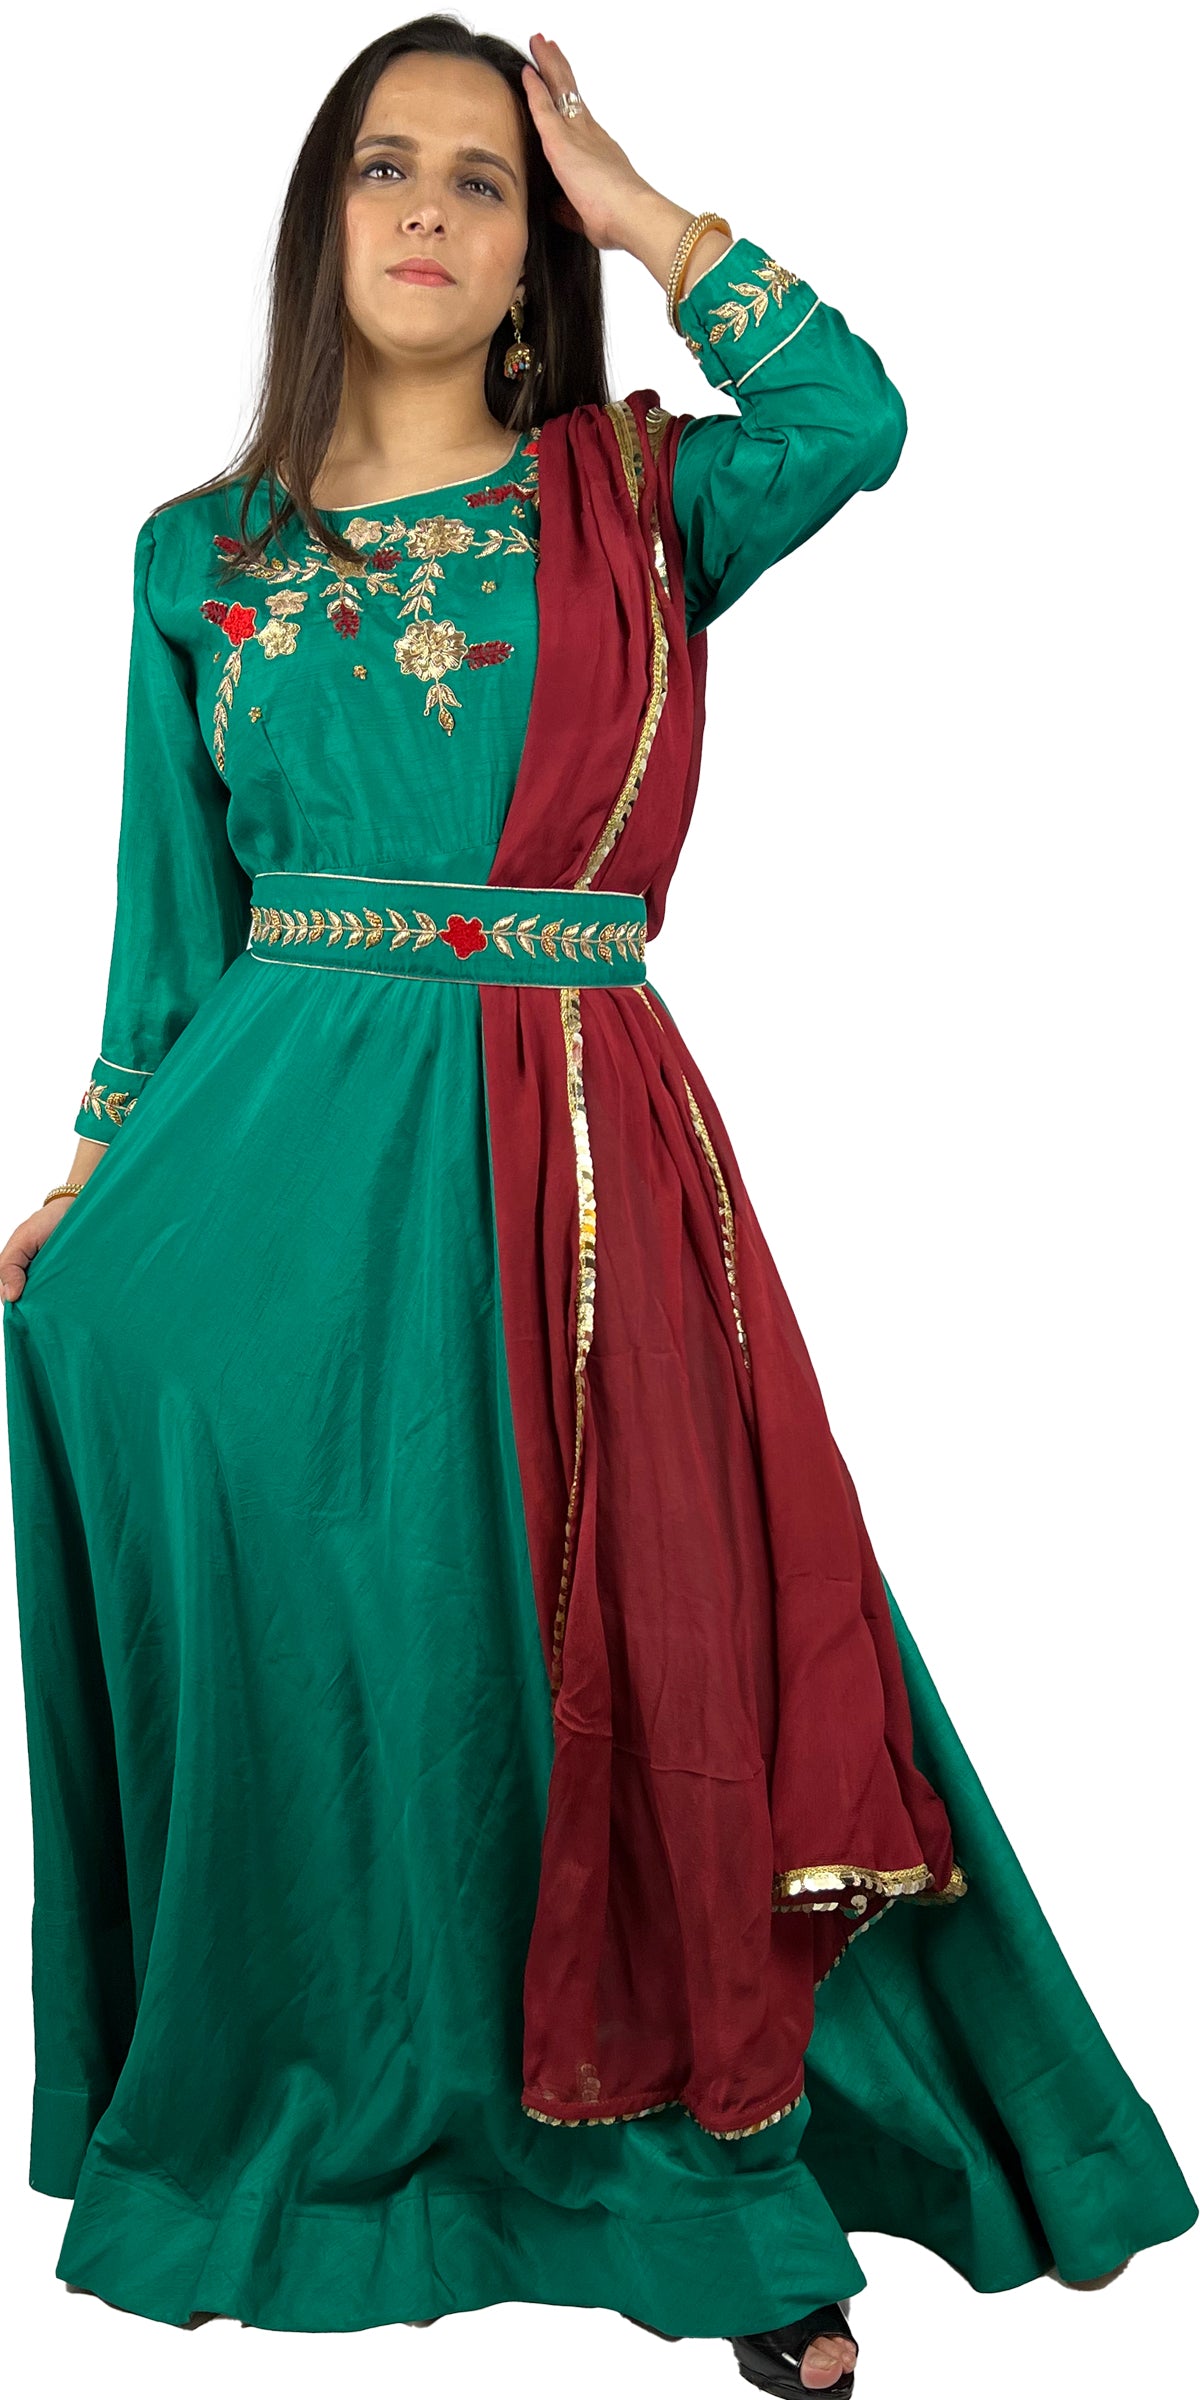 Green color hand embroidered long dress with belt and Maroon dupatta